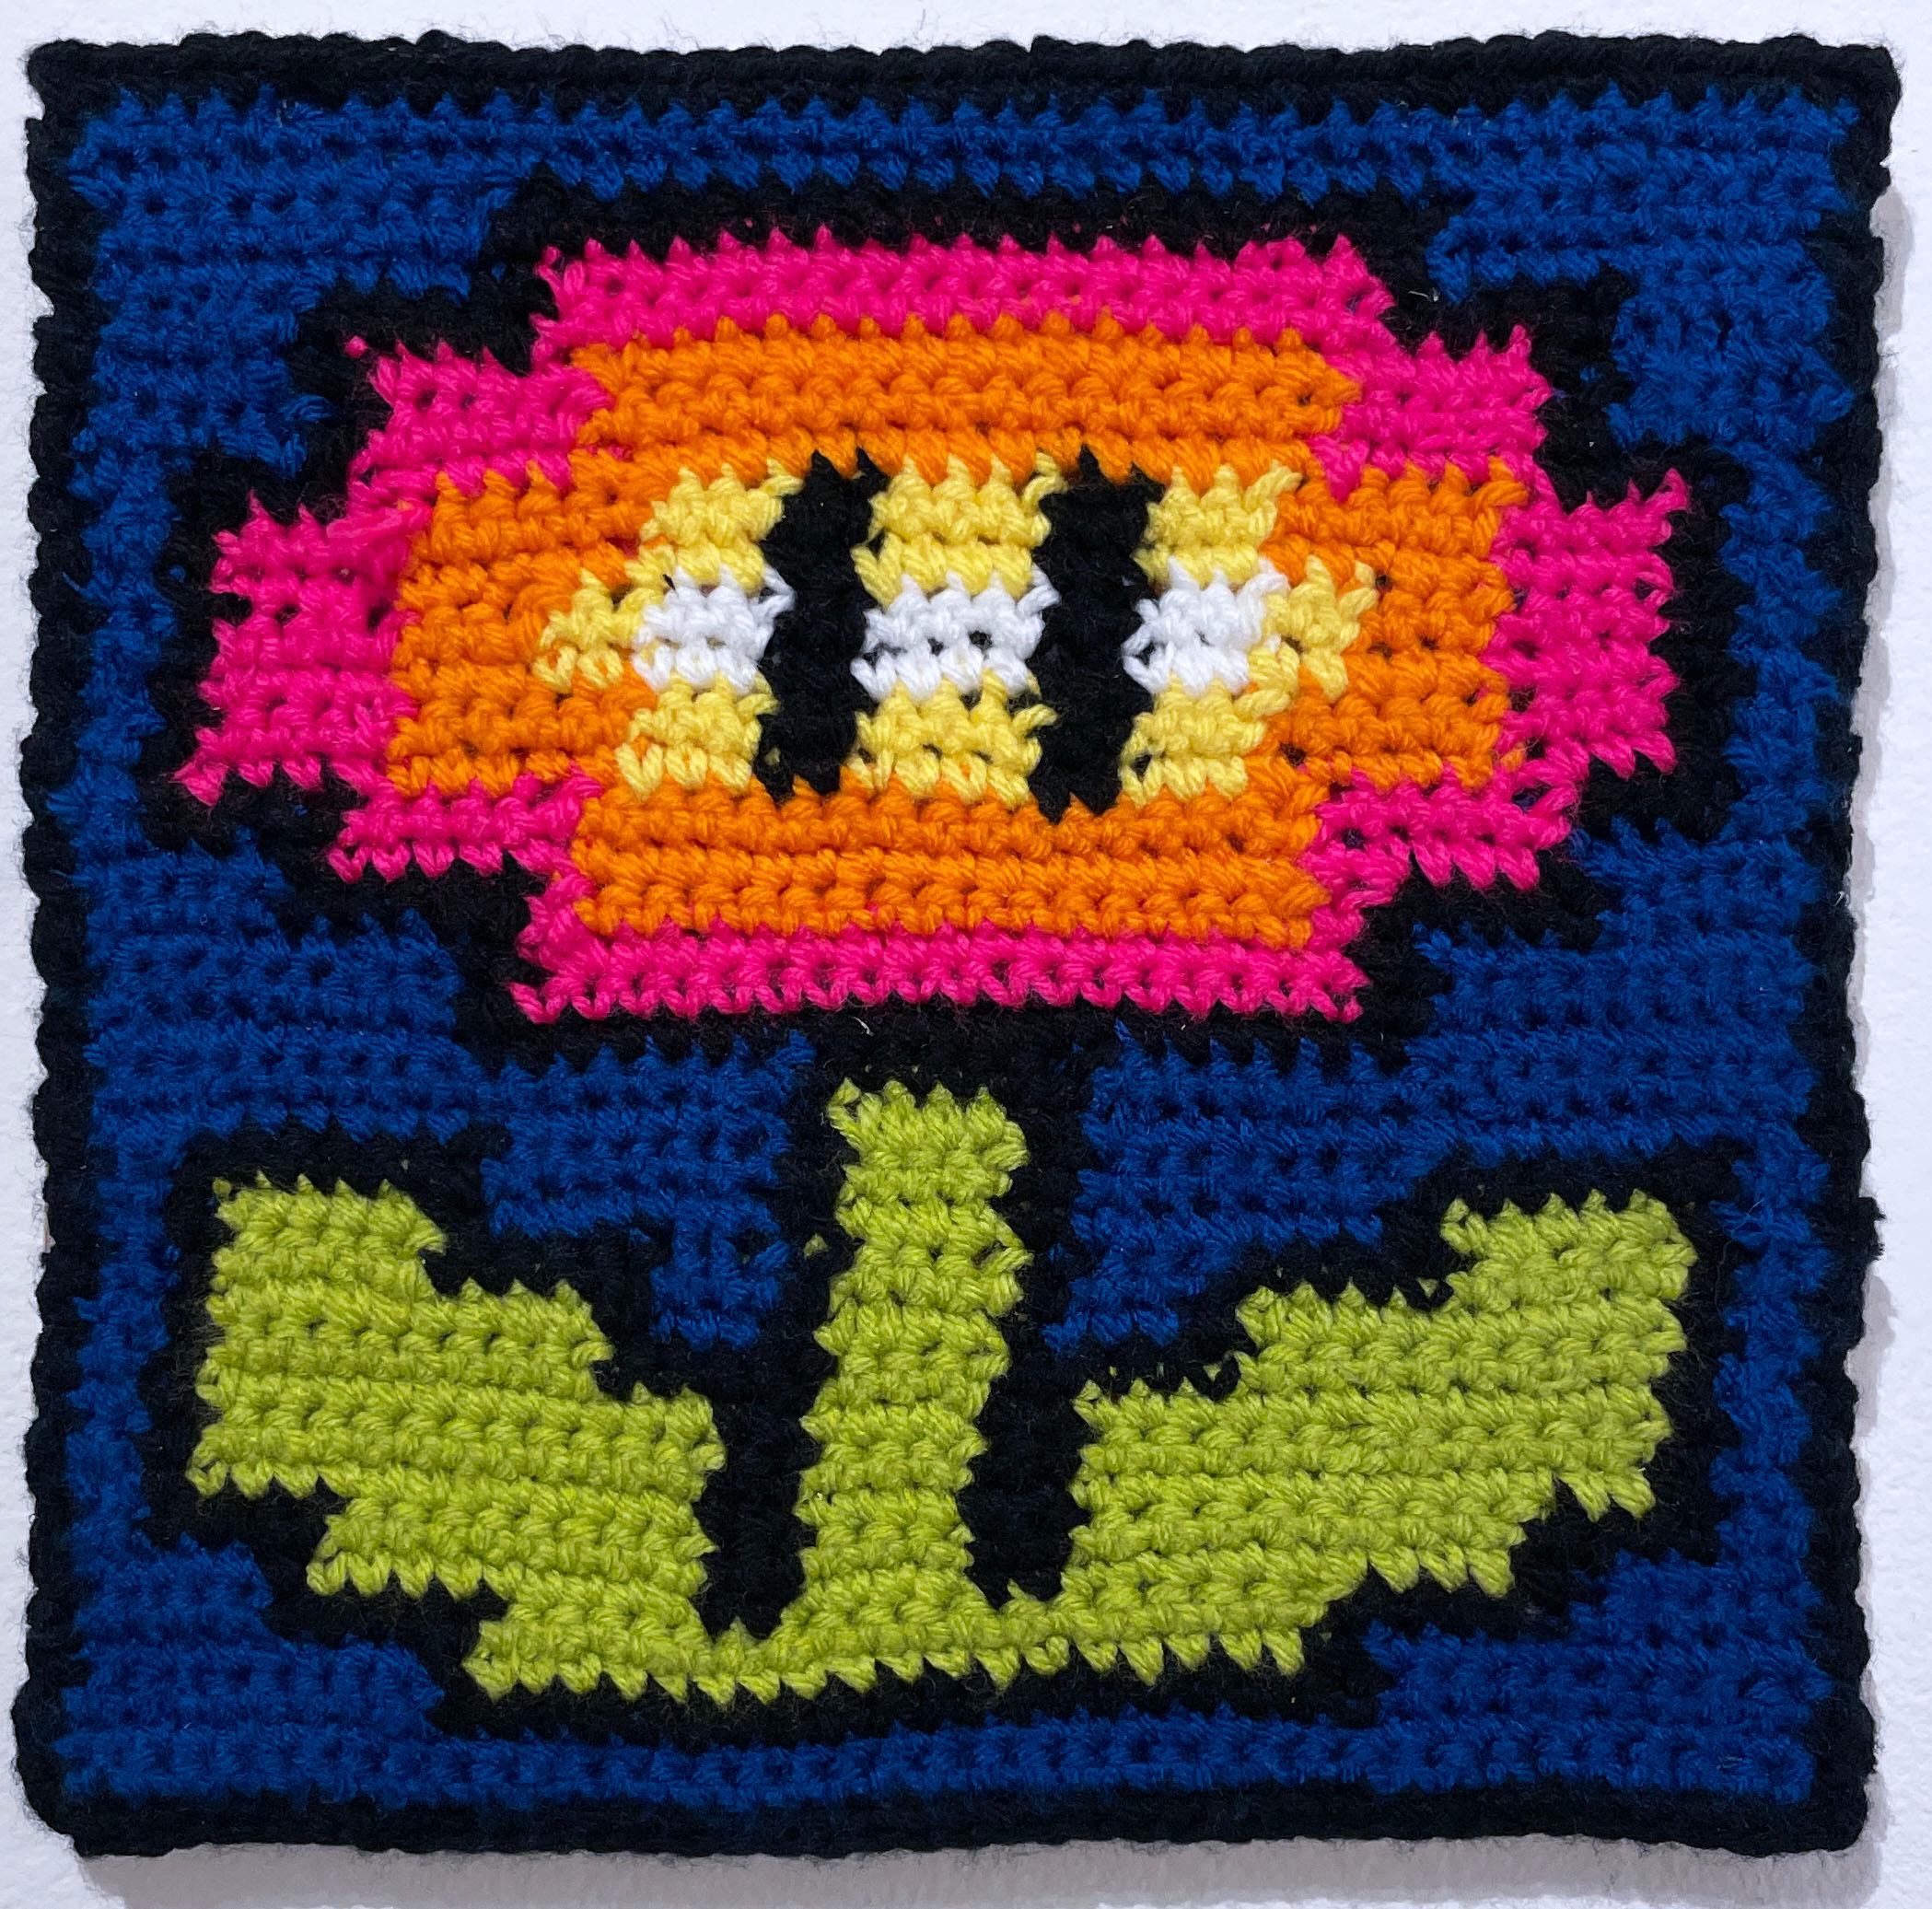 "Nintendo Flower" (2022) by street artist Lace In The Moon
10 x 10 x .75"

Figurative wall art. 1990s inspiration. Bright green, yellow, orange, pink, black, blue and white. Textile pop art made of crocheted yarn on wood panel. Nod to classic gaming